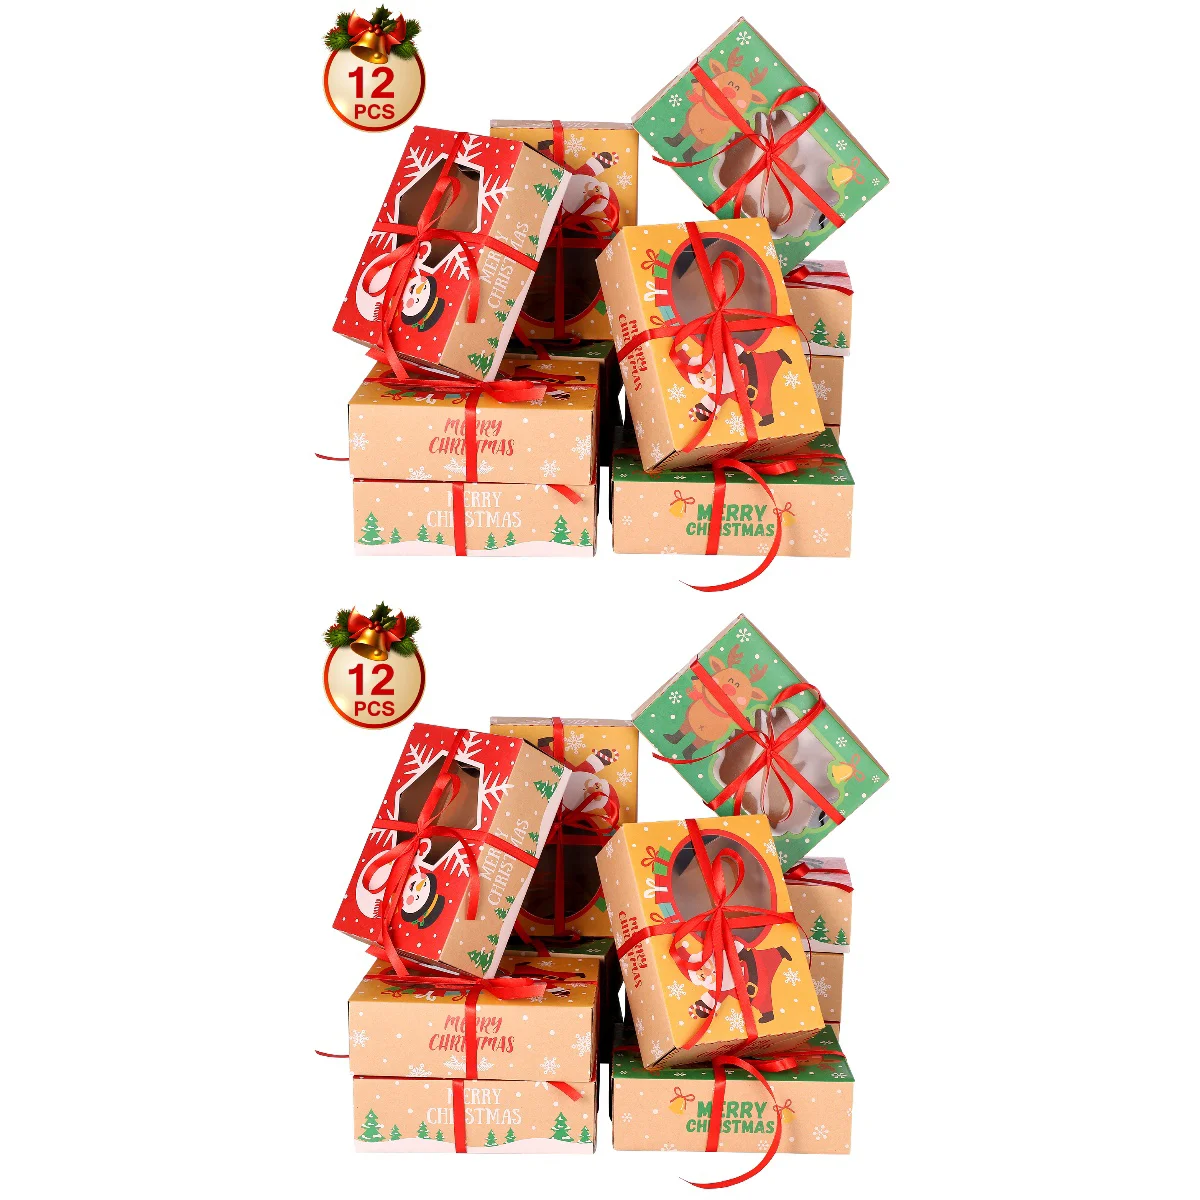 

2pcs PRETYZOOM 12pcs Christmas Cookie Boxes Kraft Paper Boxes with 1 Roll/22m Ribbons Gift Candies Boxes for Christmas Party